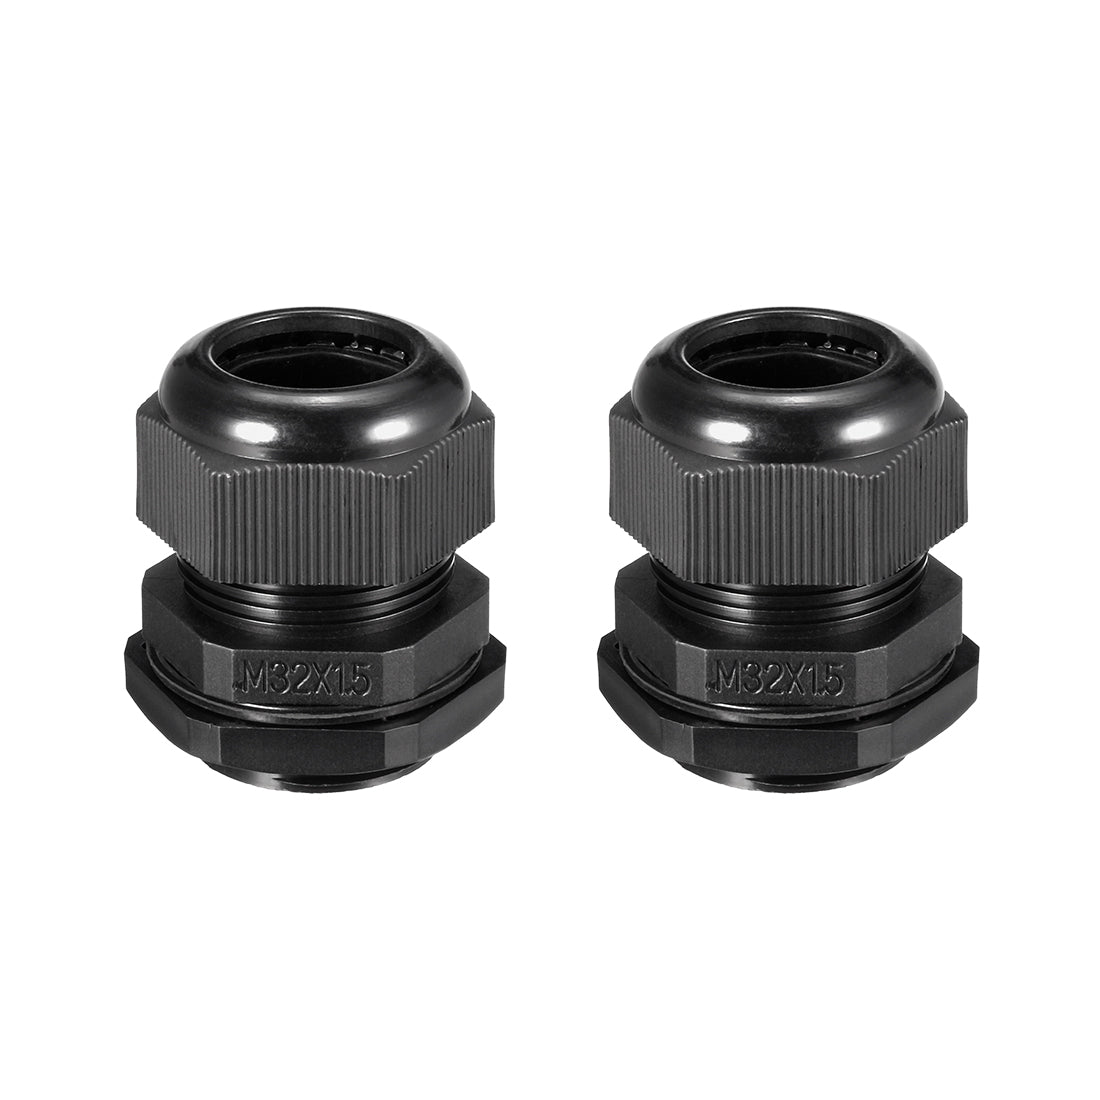 uxcell Uxcell M32 Cable Gland Waterproof Plastic Joint Adjustable Locknut Black for 15mm-22mm Dia Cable Wire 2 Pcs